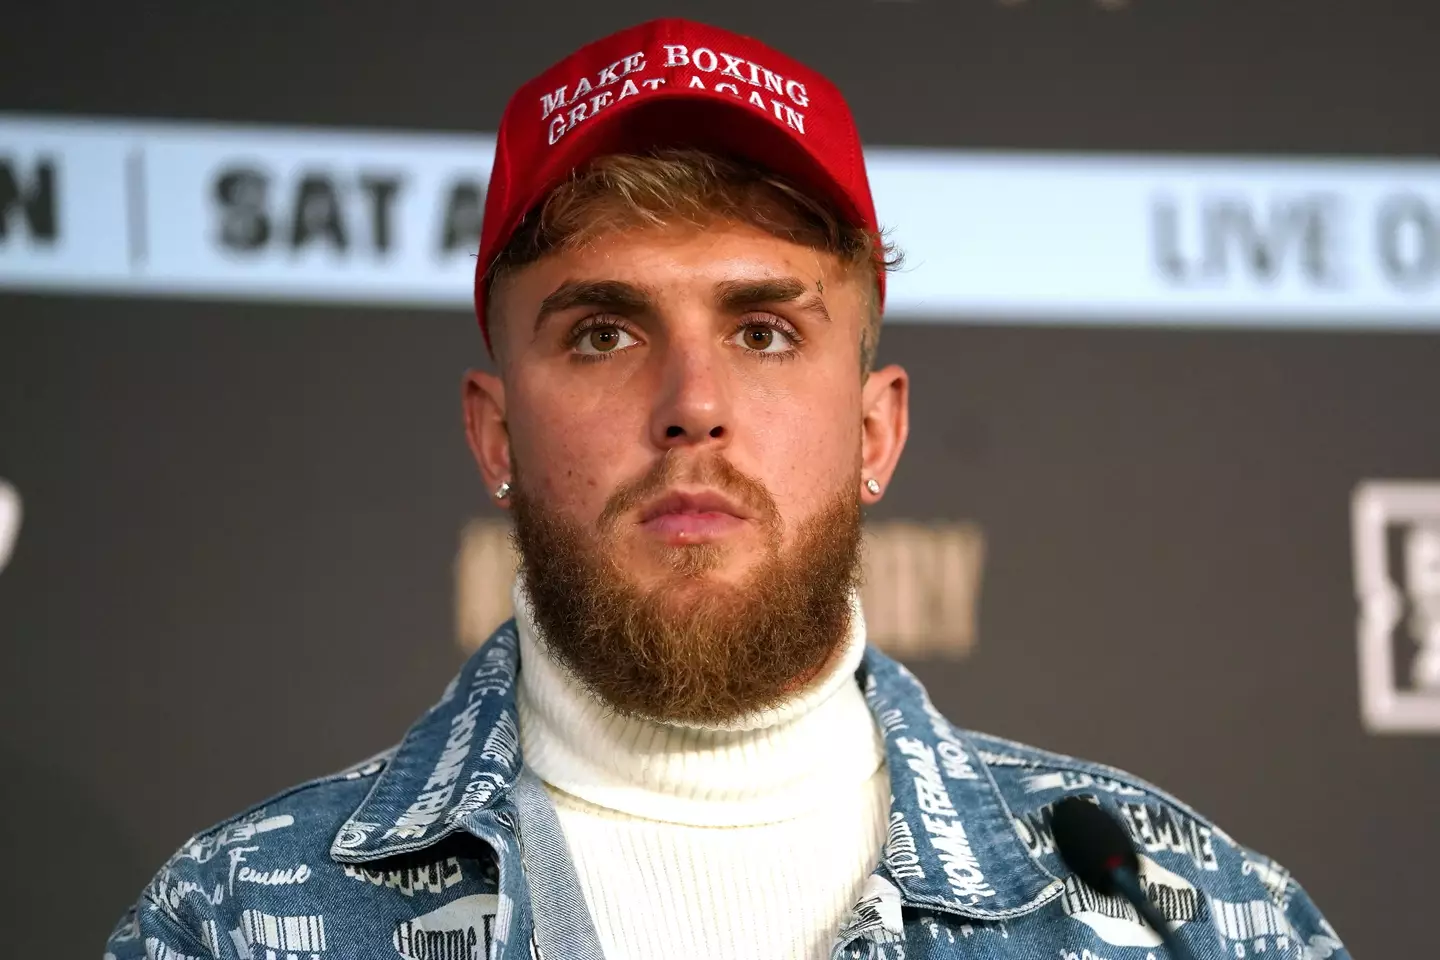 Jake Paul has called on Mike Tyson to make an exhibition fight happen.